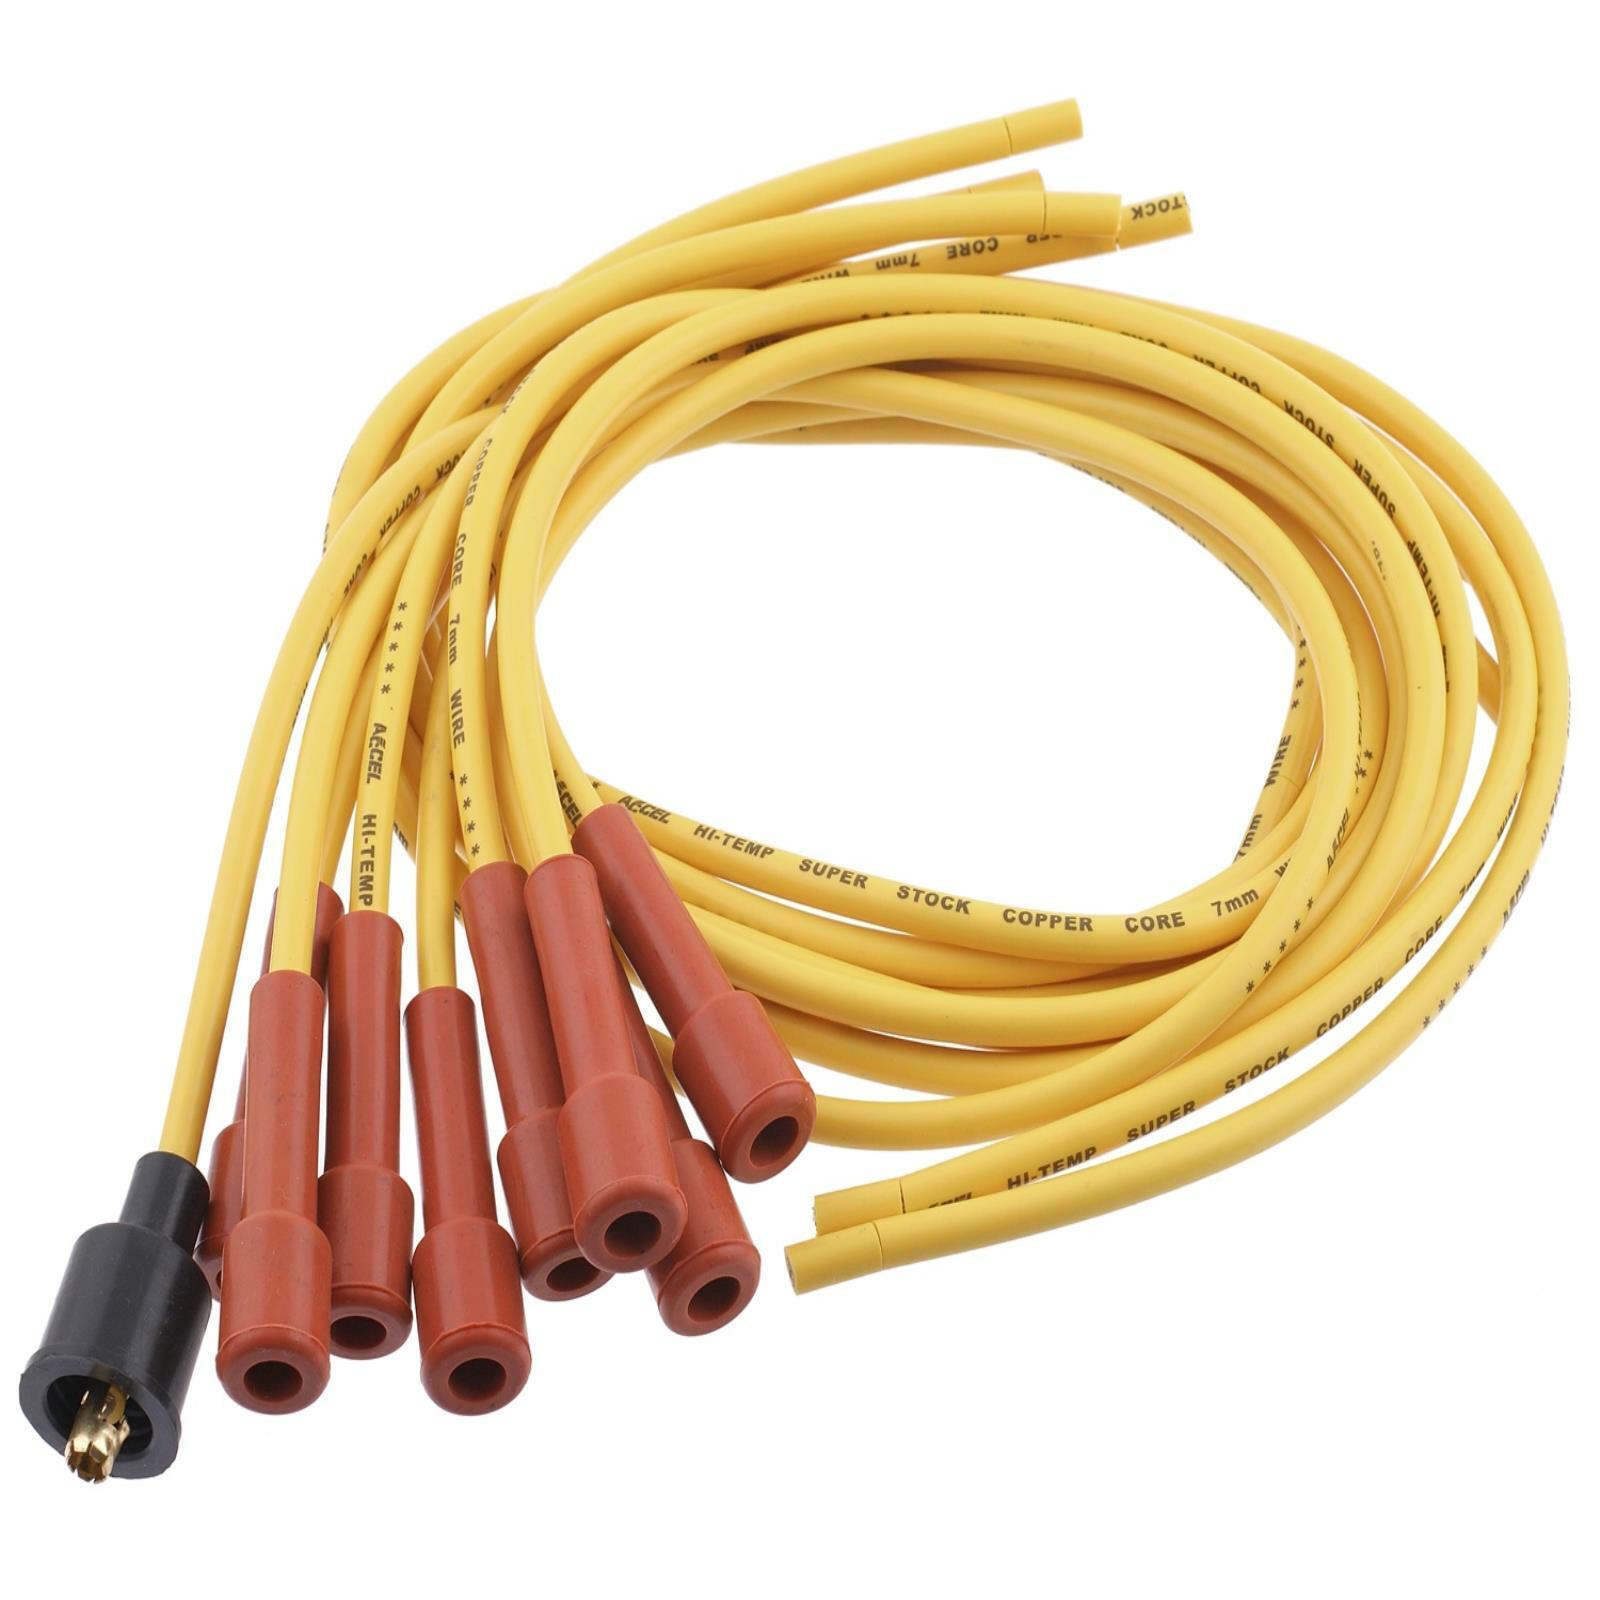 ACCEL Universal Fit Super Stock Spark Plug Wire Set For 1970 For